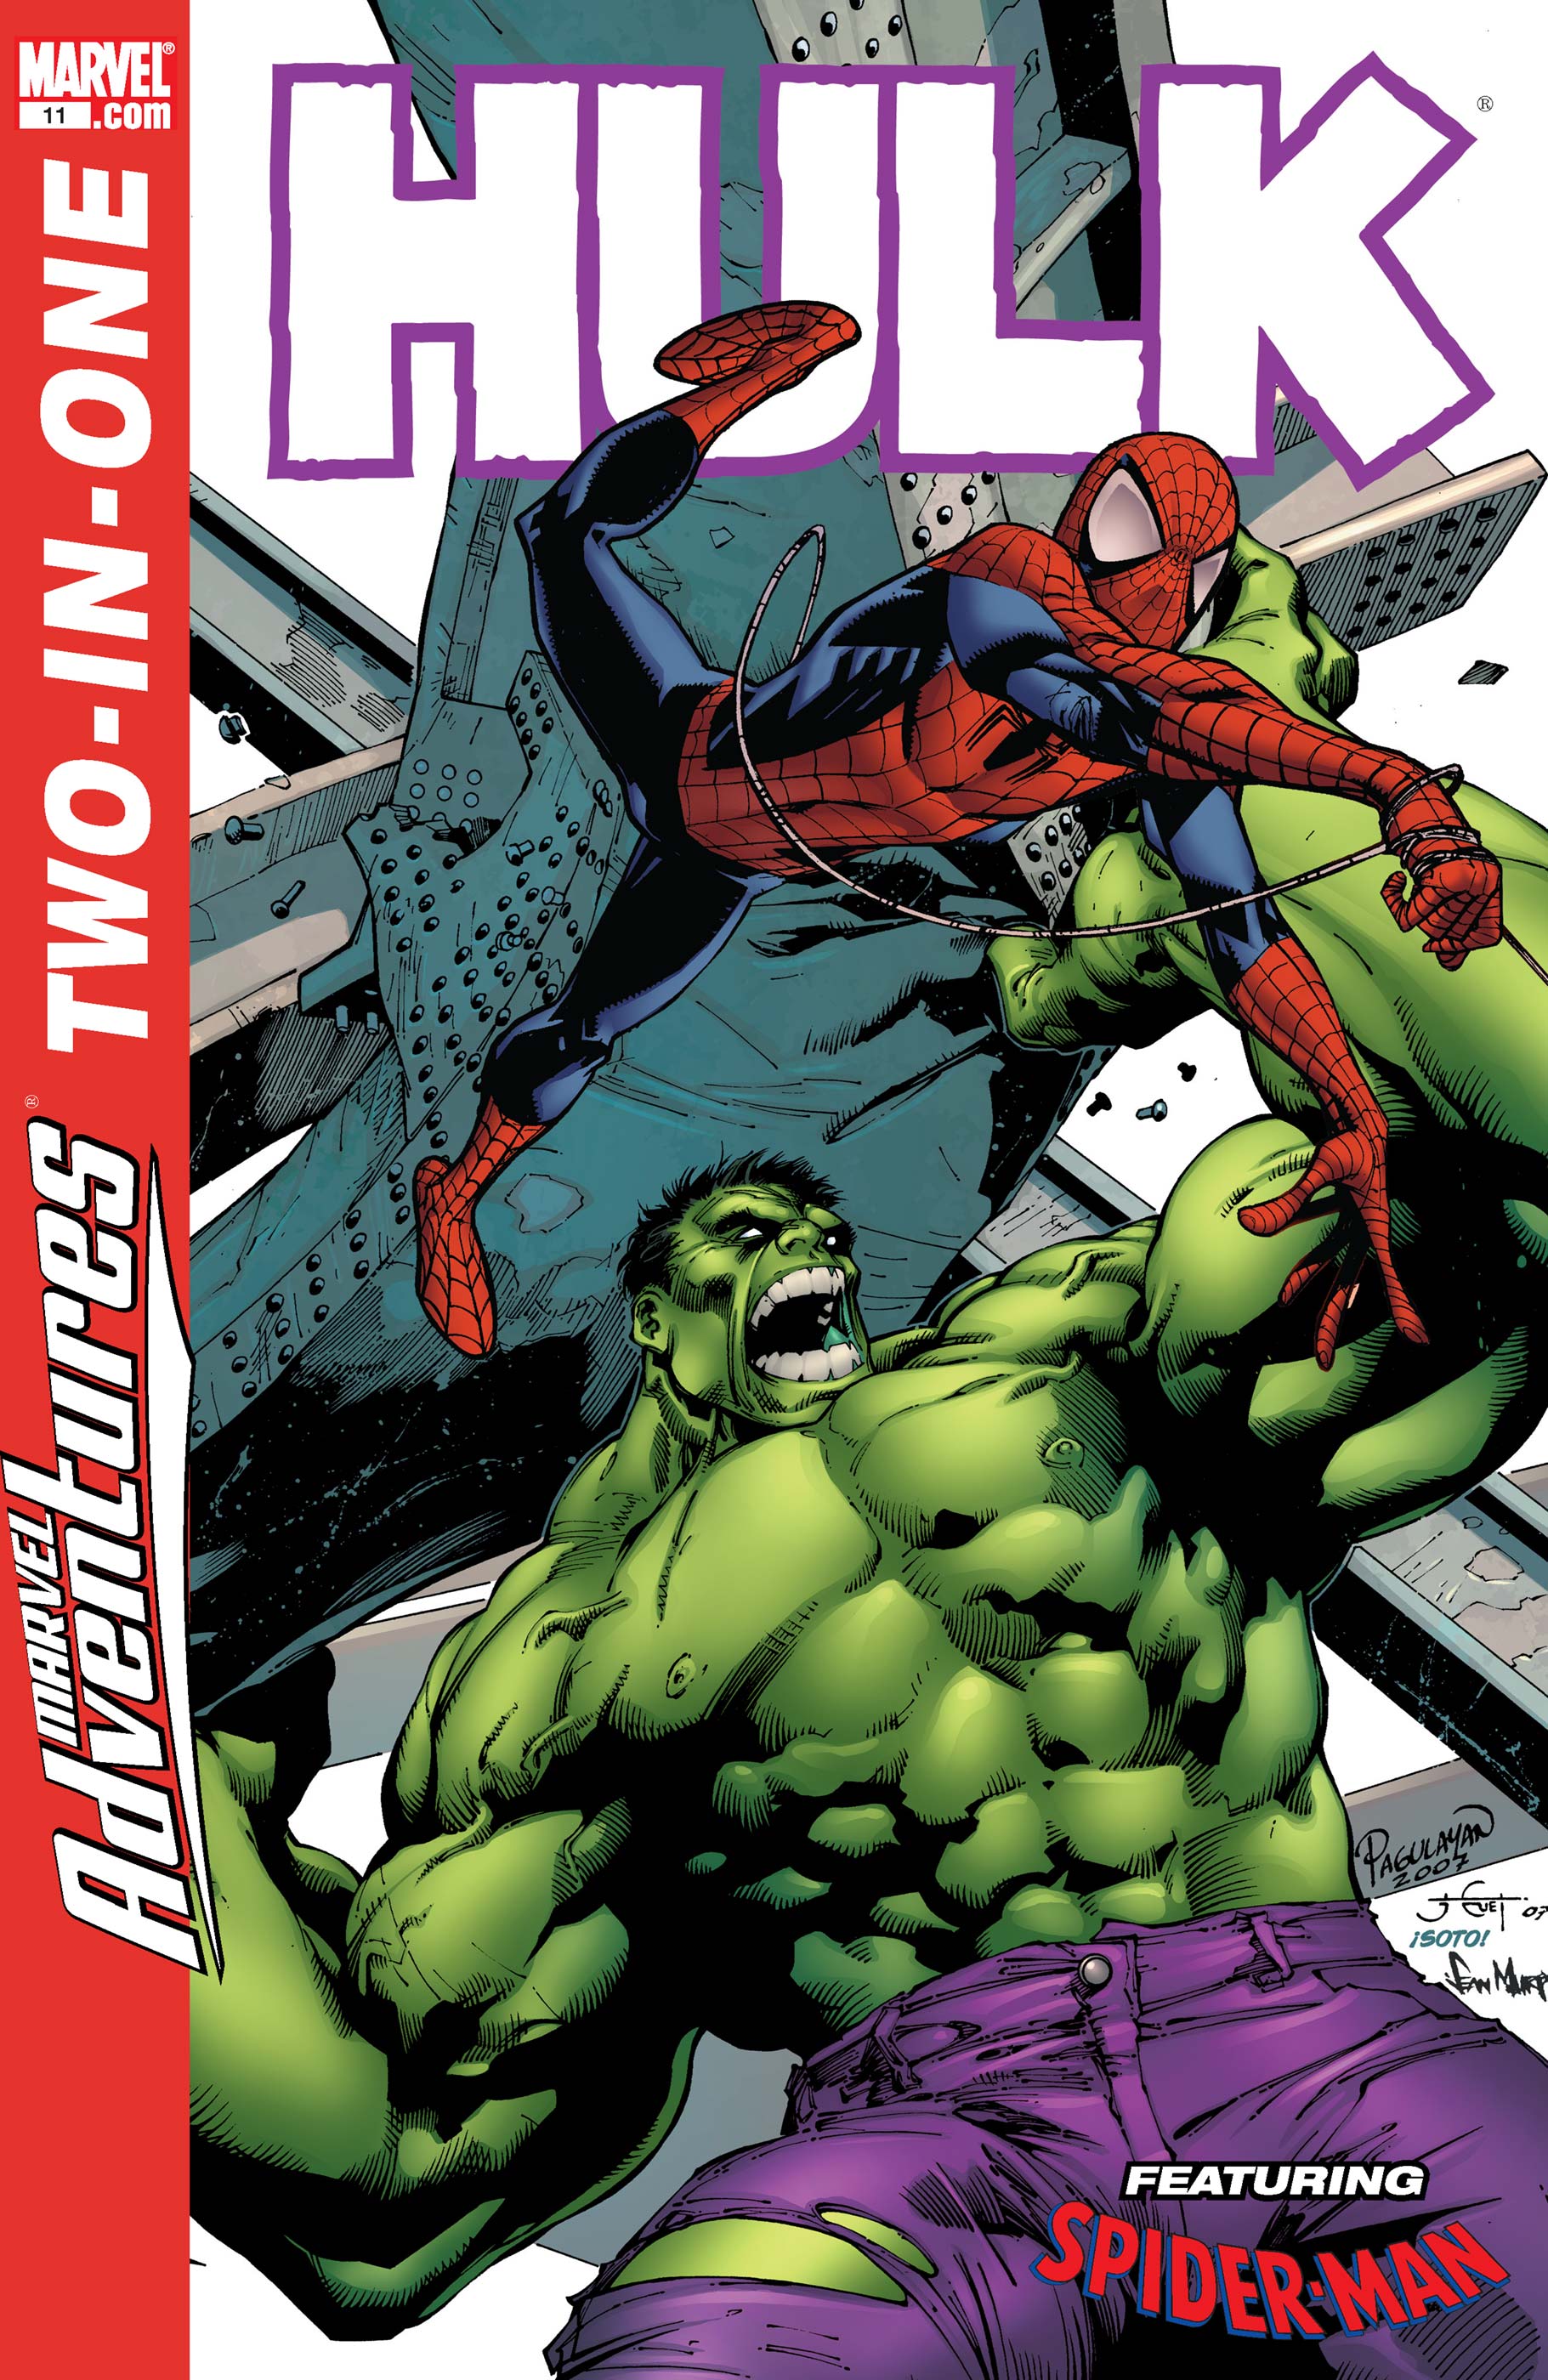 Marvel Adventures Two-in-One (2007) #11